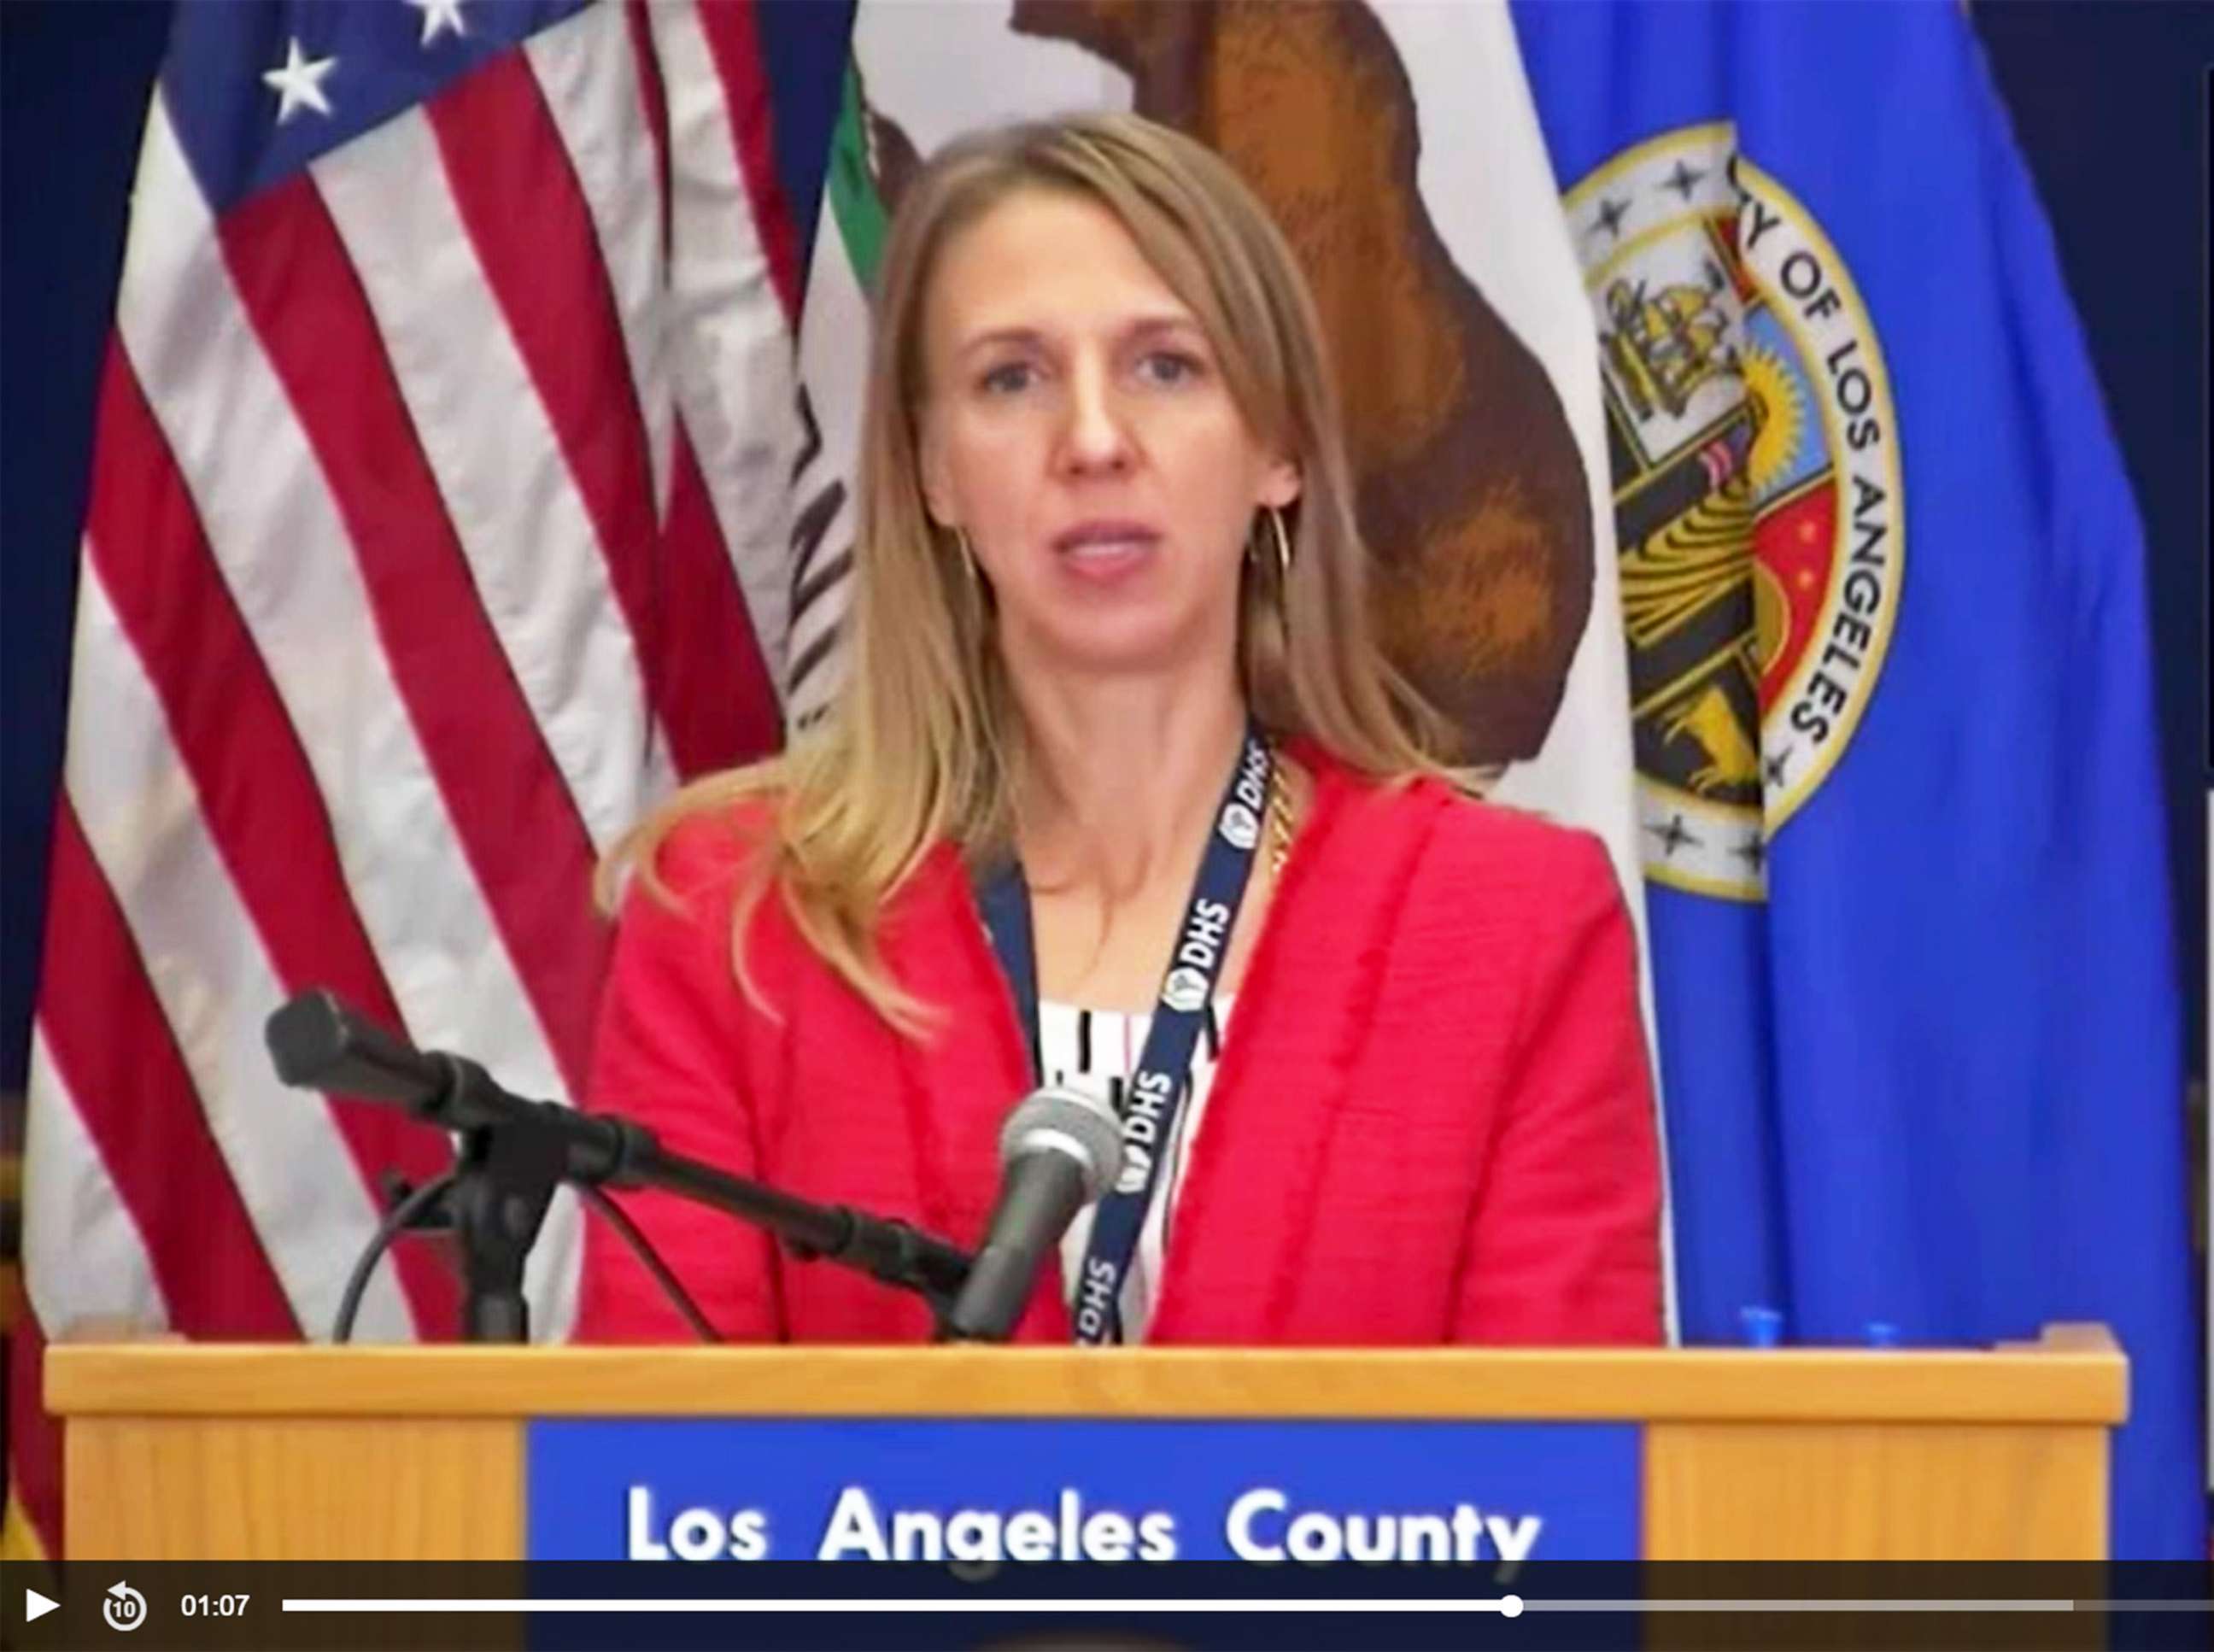 PHOTO: Dr Christina Ghaly, the Director of the Department of Health Services for Los Angeles County, speaks during a press conference updating on the surge of COVID-19 and status of hospitals, Dec. 17, 2020.